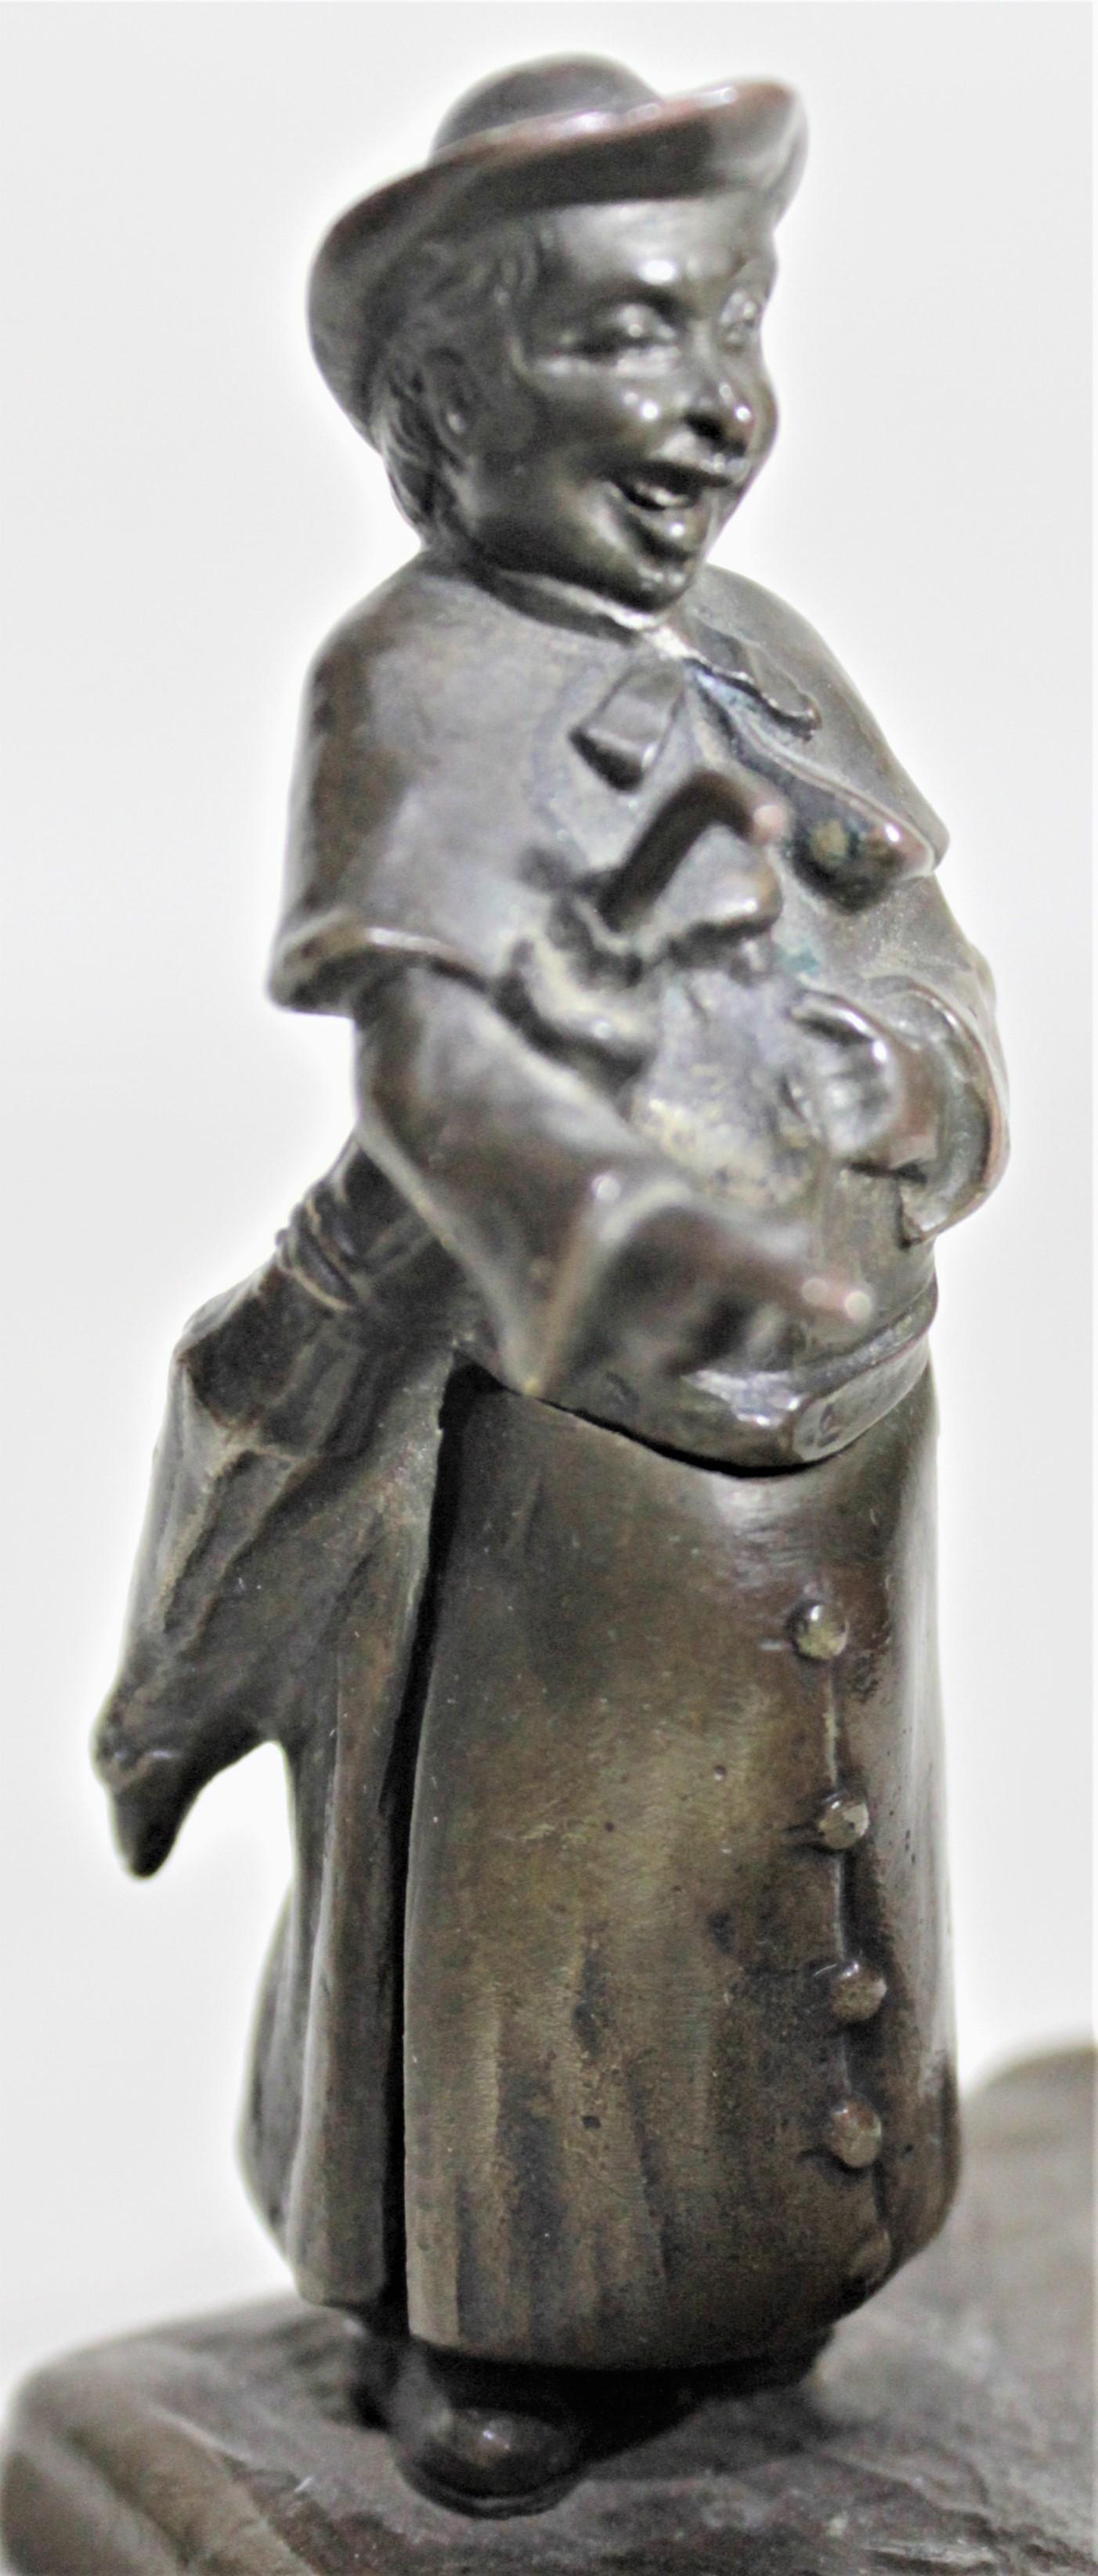 Antique Signed Bahnert French Erotic Articulated Cast Bronze Sculpture In Good Condition For Sale In Hamilton, Ontario